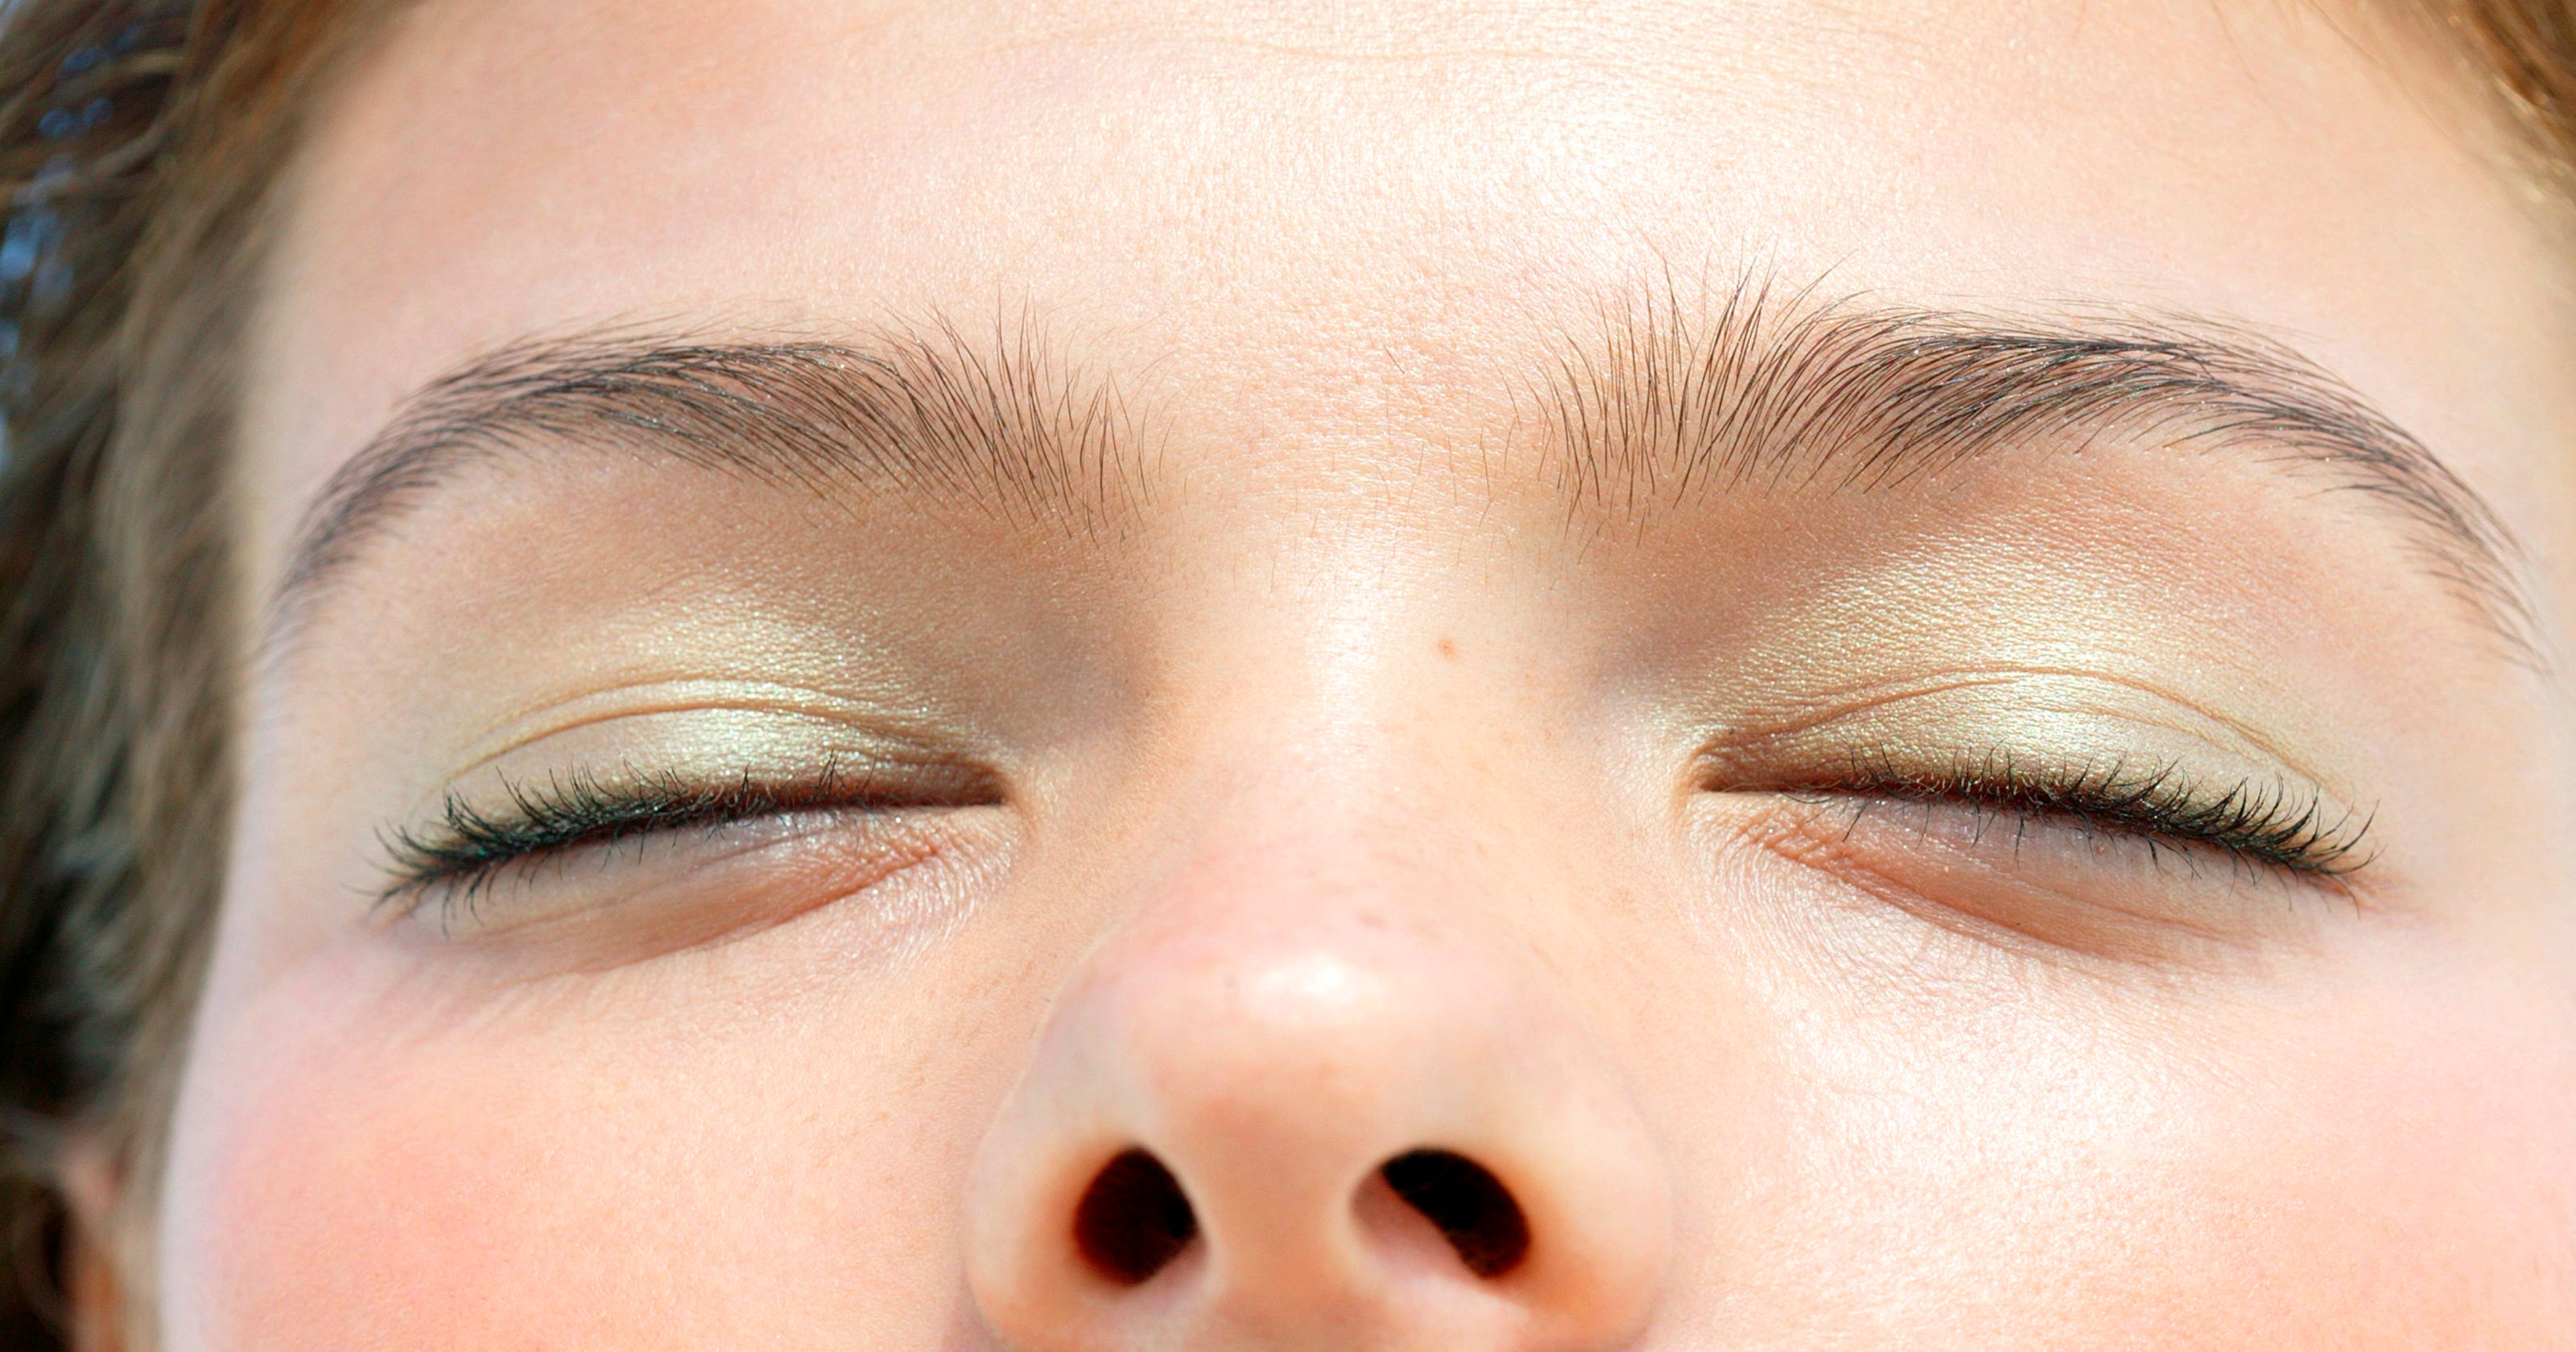 What You Can Do About Those Under Eye Circles